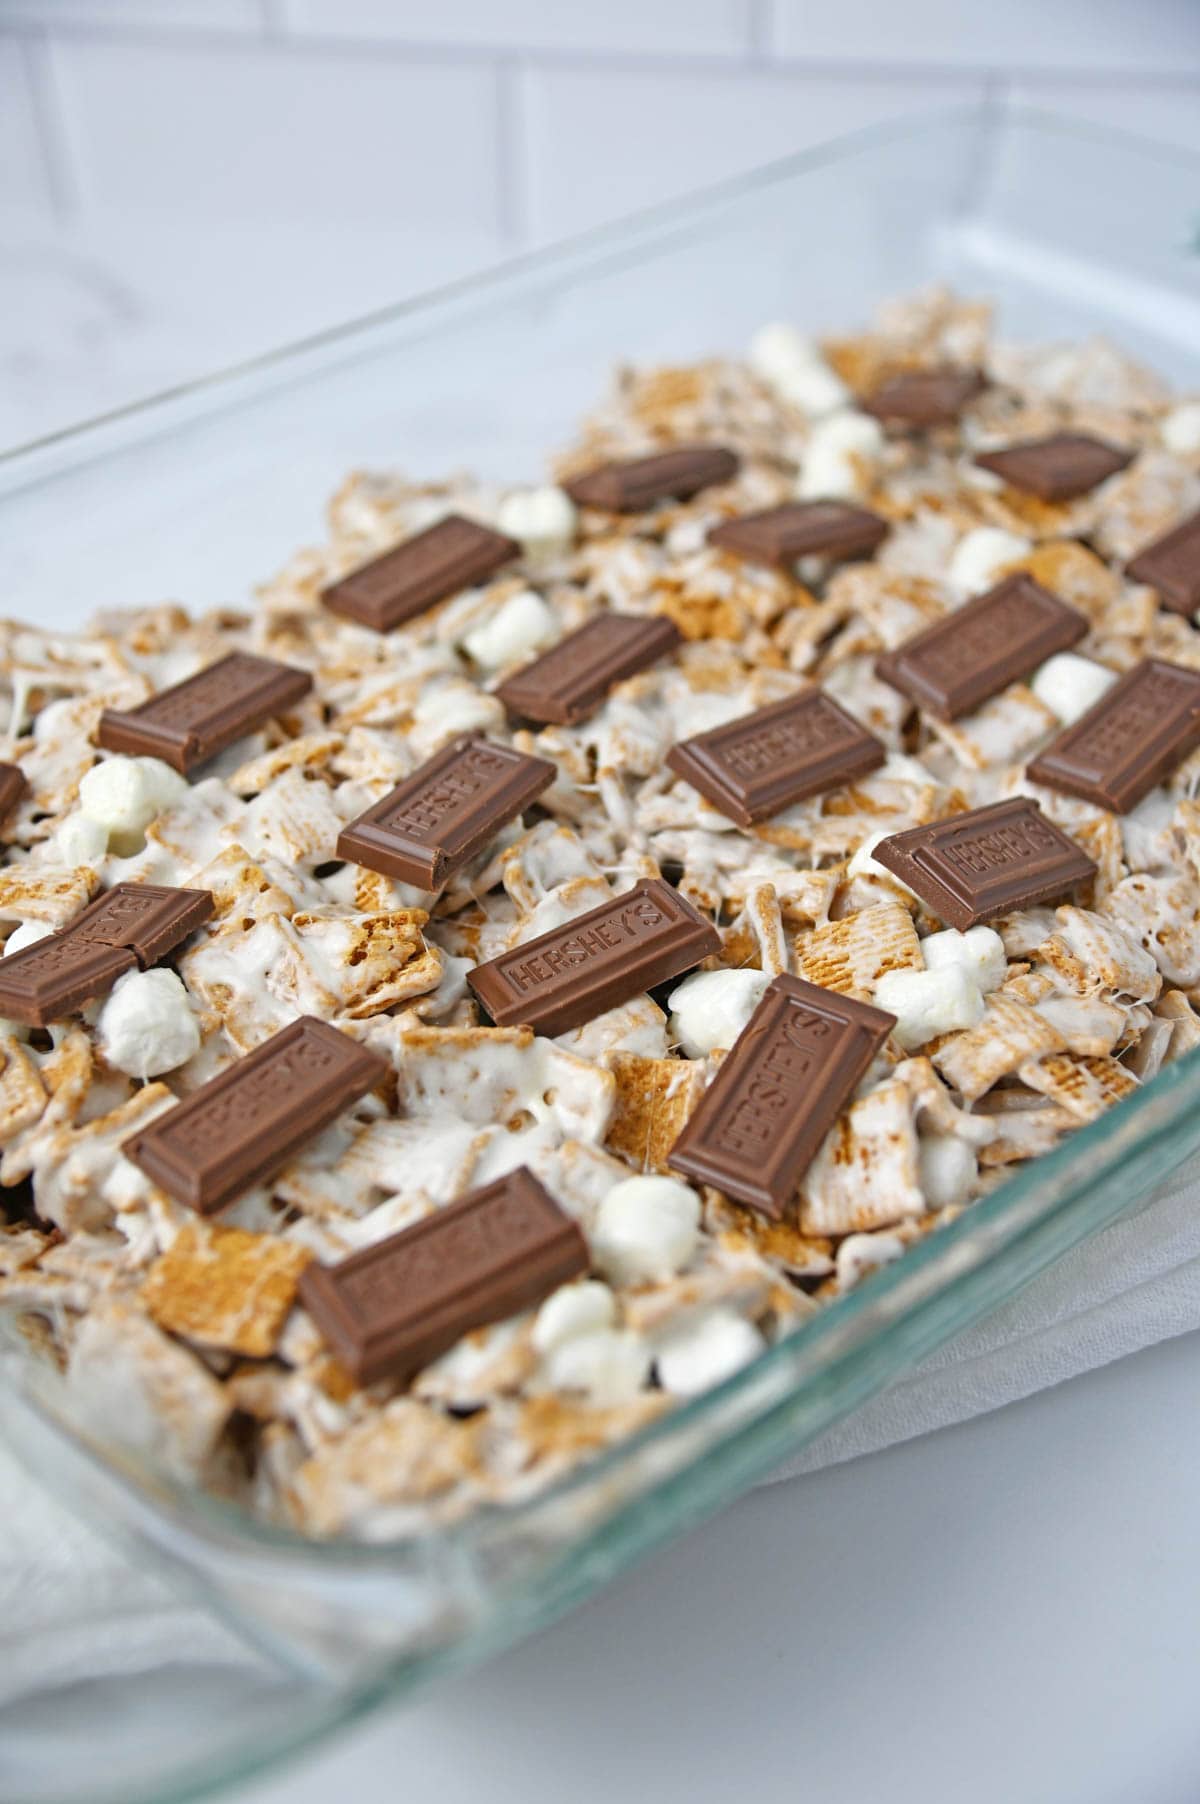 Cereal mixture topped with Hershey's chocolate squares